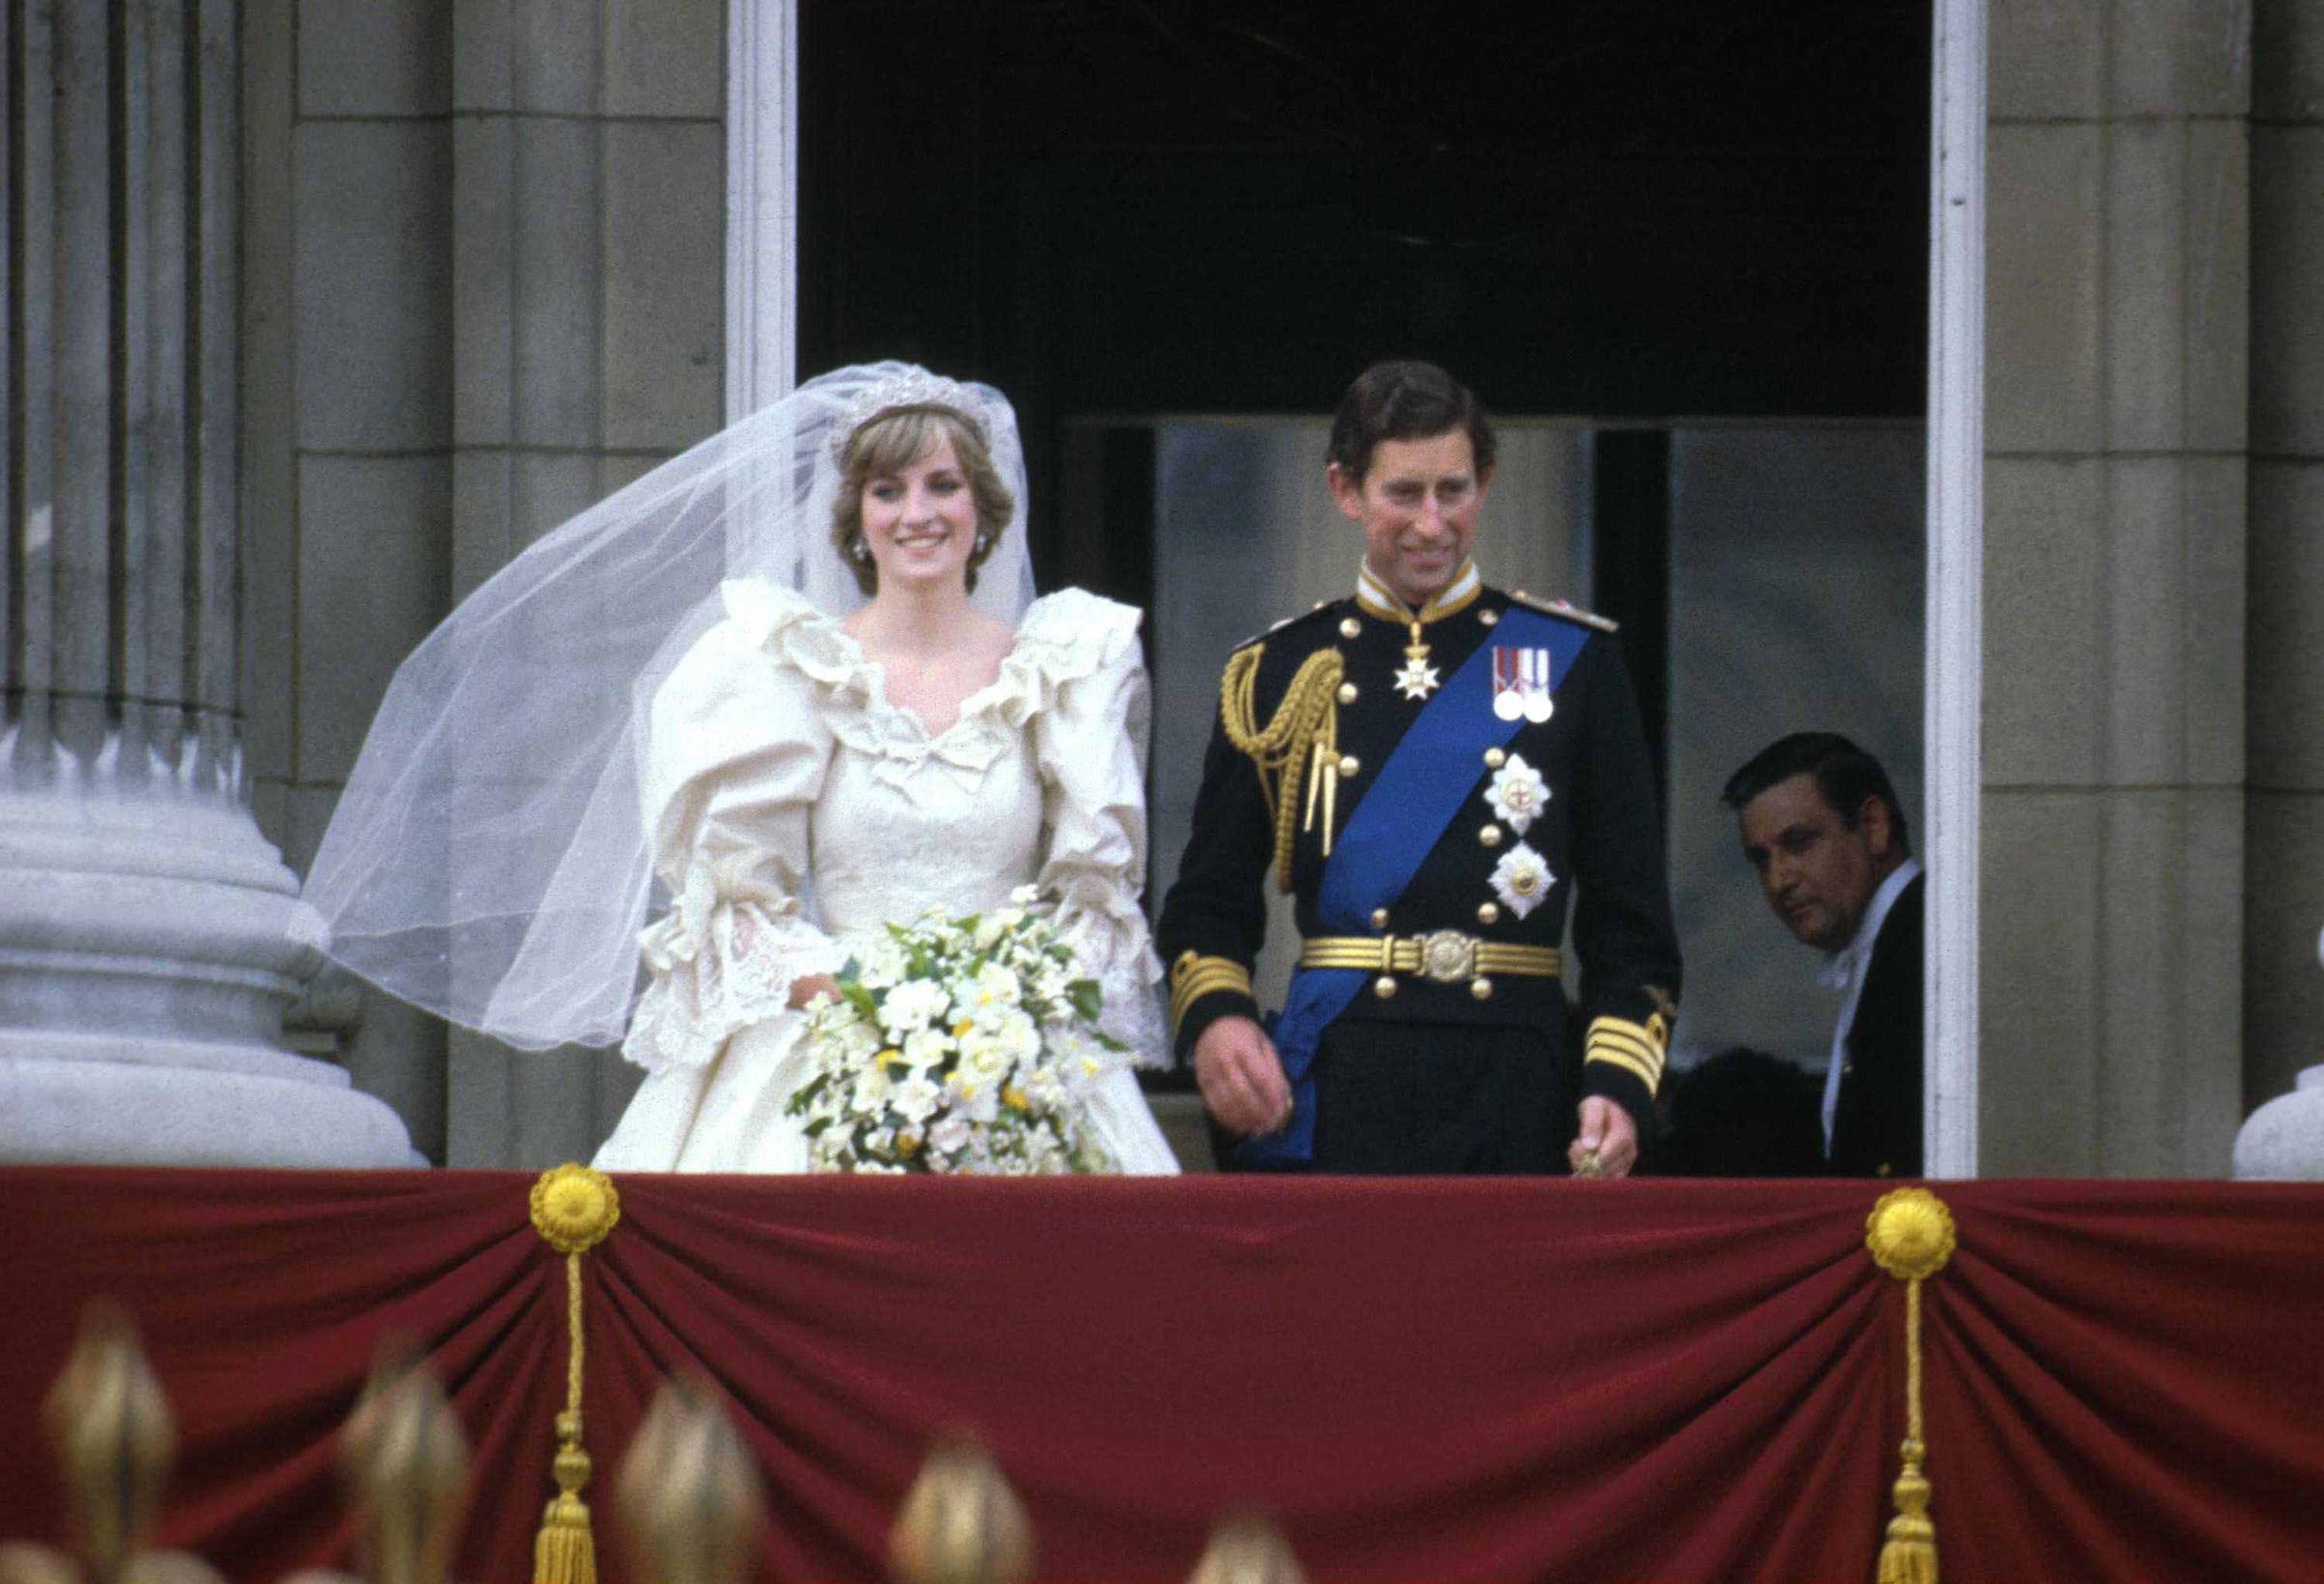 Prince Charles and Princess Diana on the balcony of Buckingham Palace after their wedding ceremony at St. Paul's Cathedral on July 29, 1981. | Photo: Getty Images